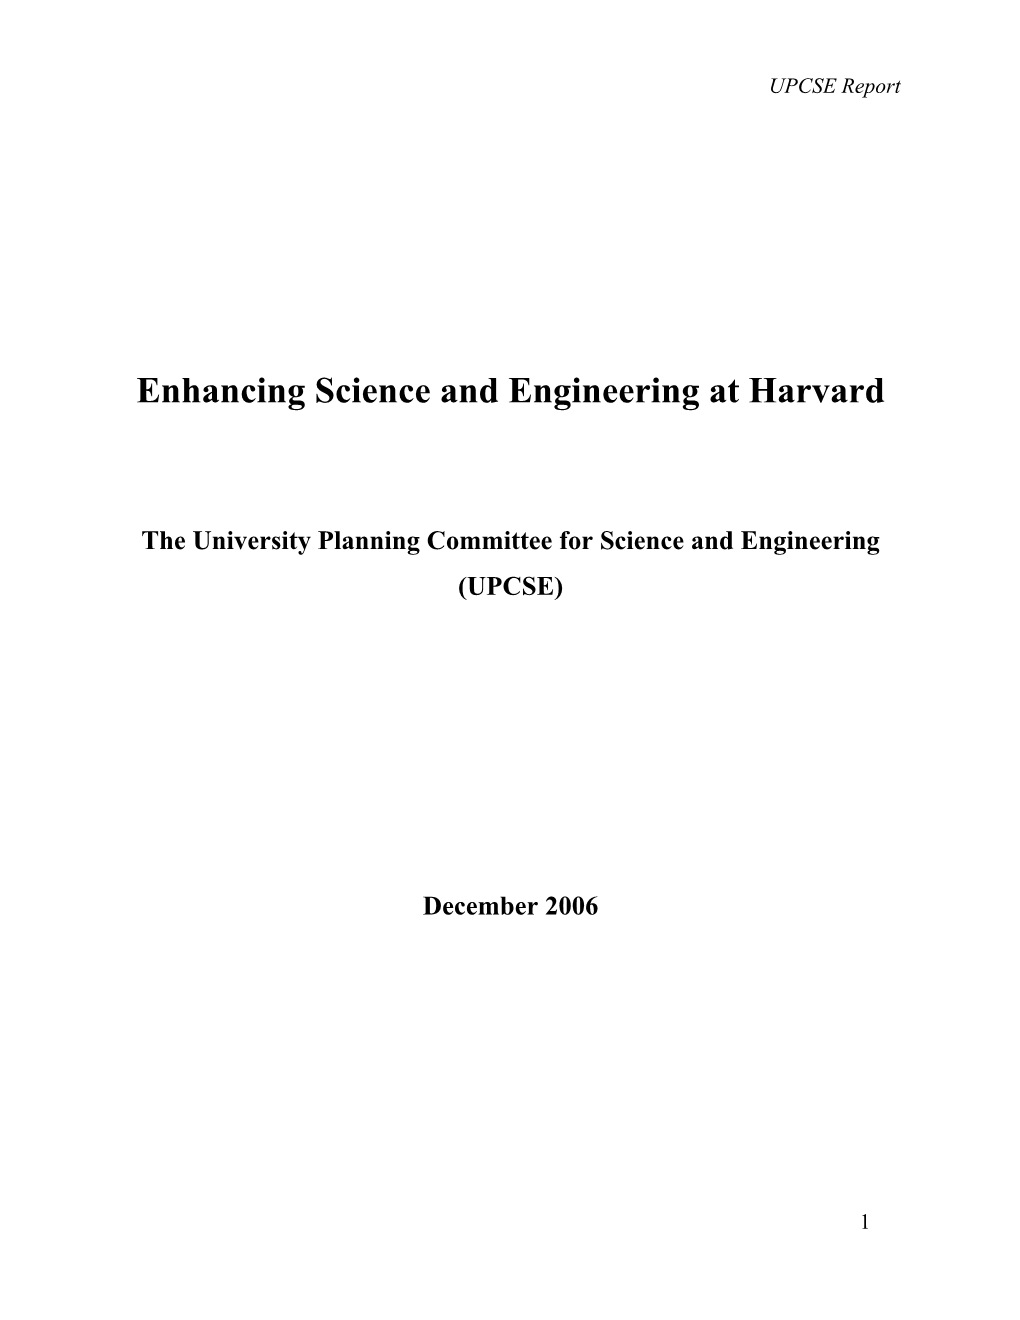 The University Planning Committee for Science and Engineering (UPCSE)